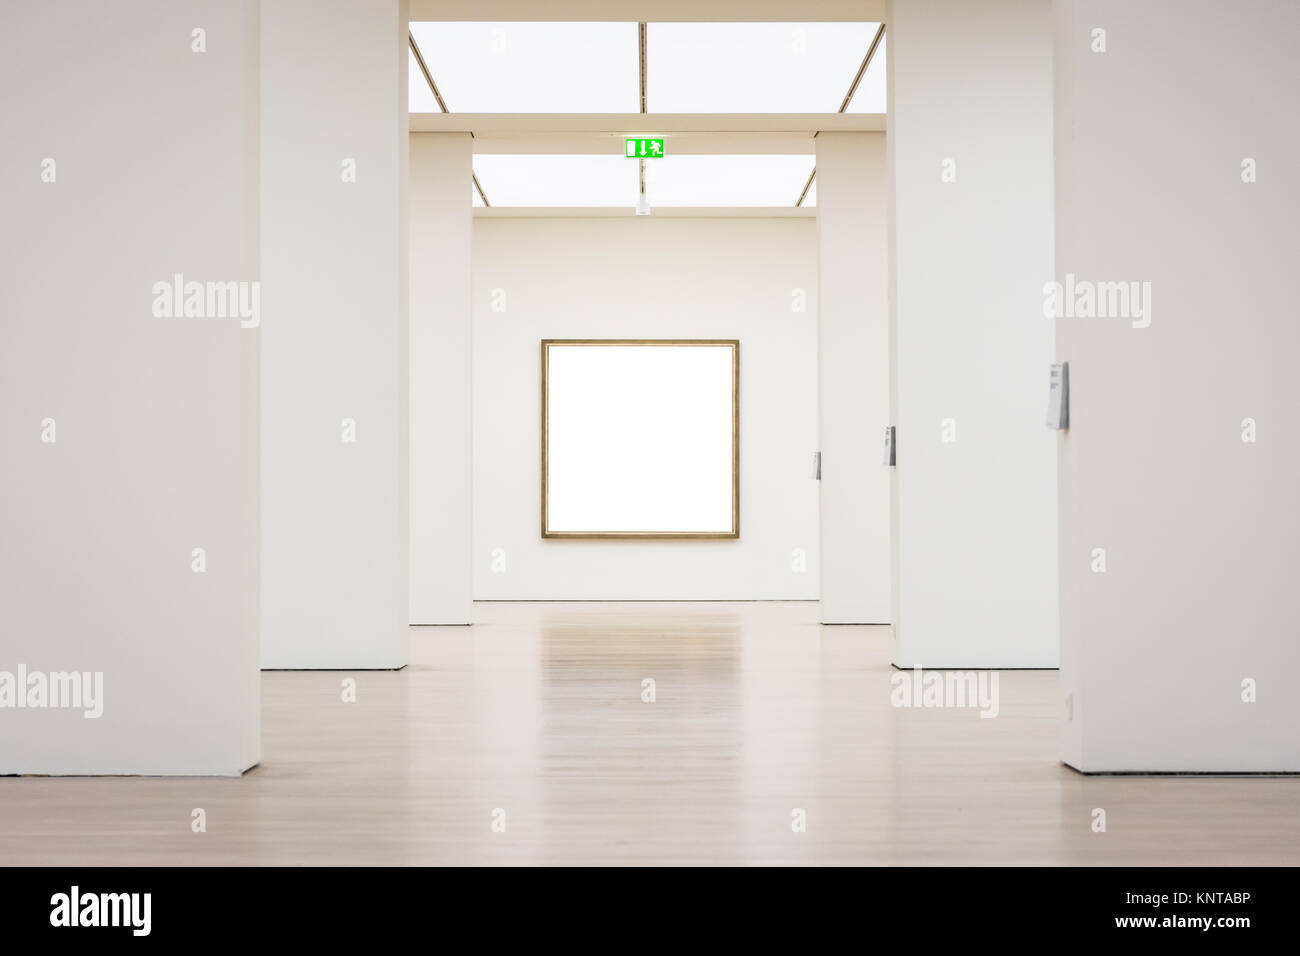 Modern Art Museum Frame Wall Clipping Path Isolated White Vector Illustration Template Stock Photo